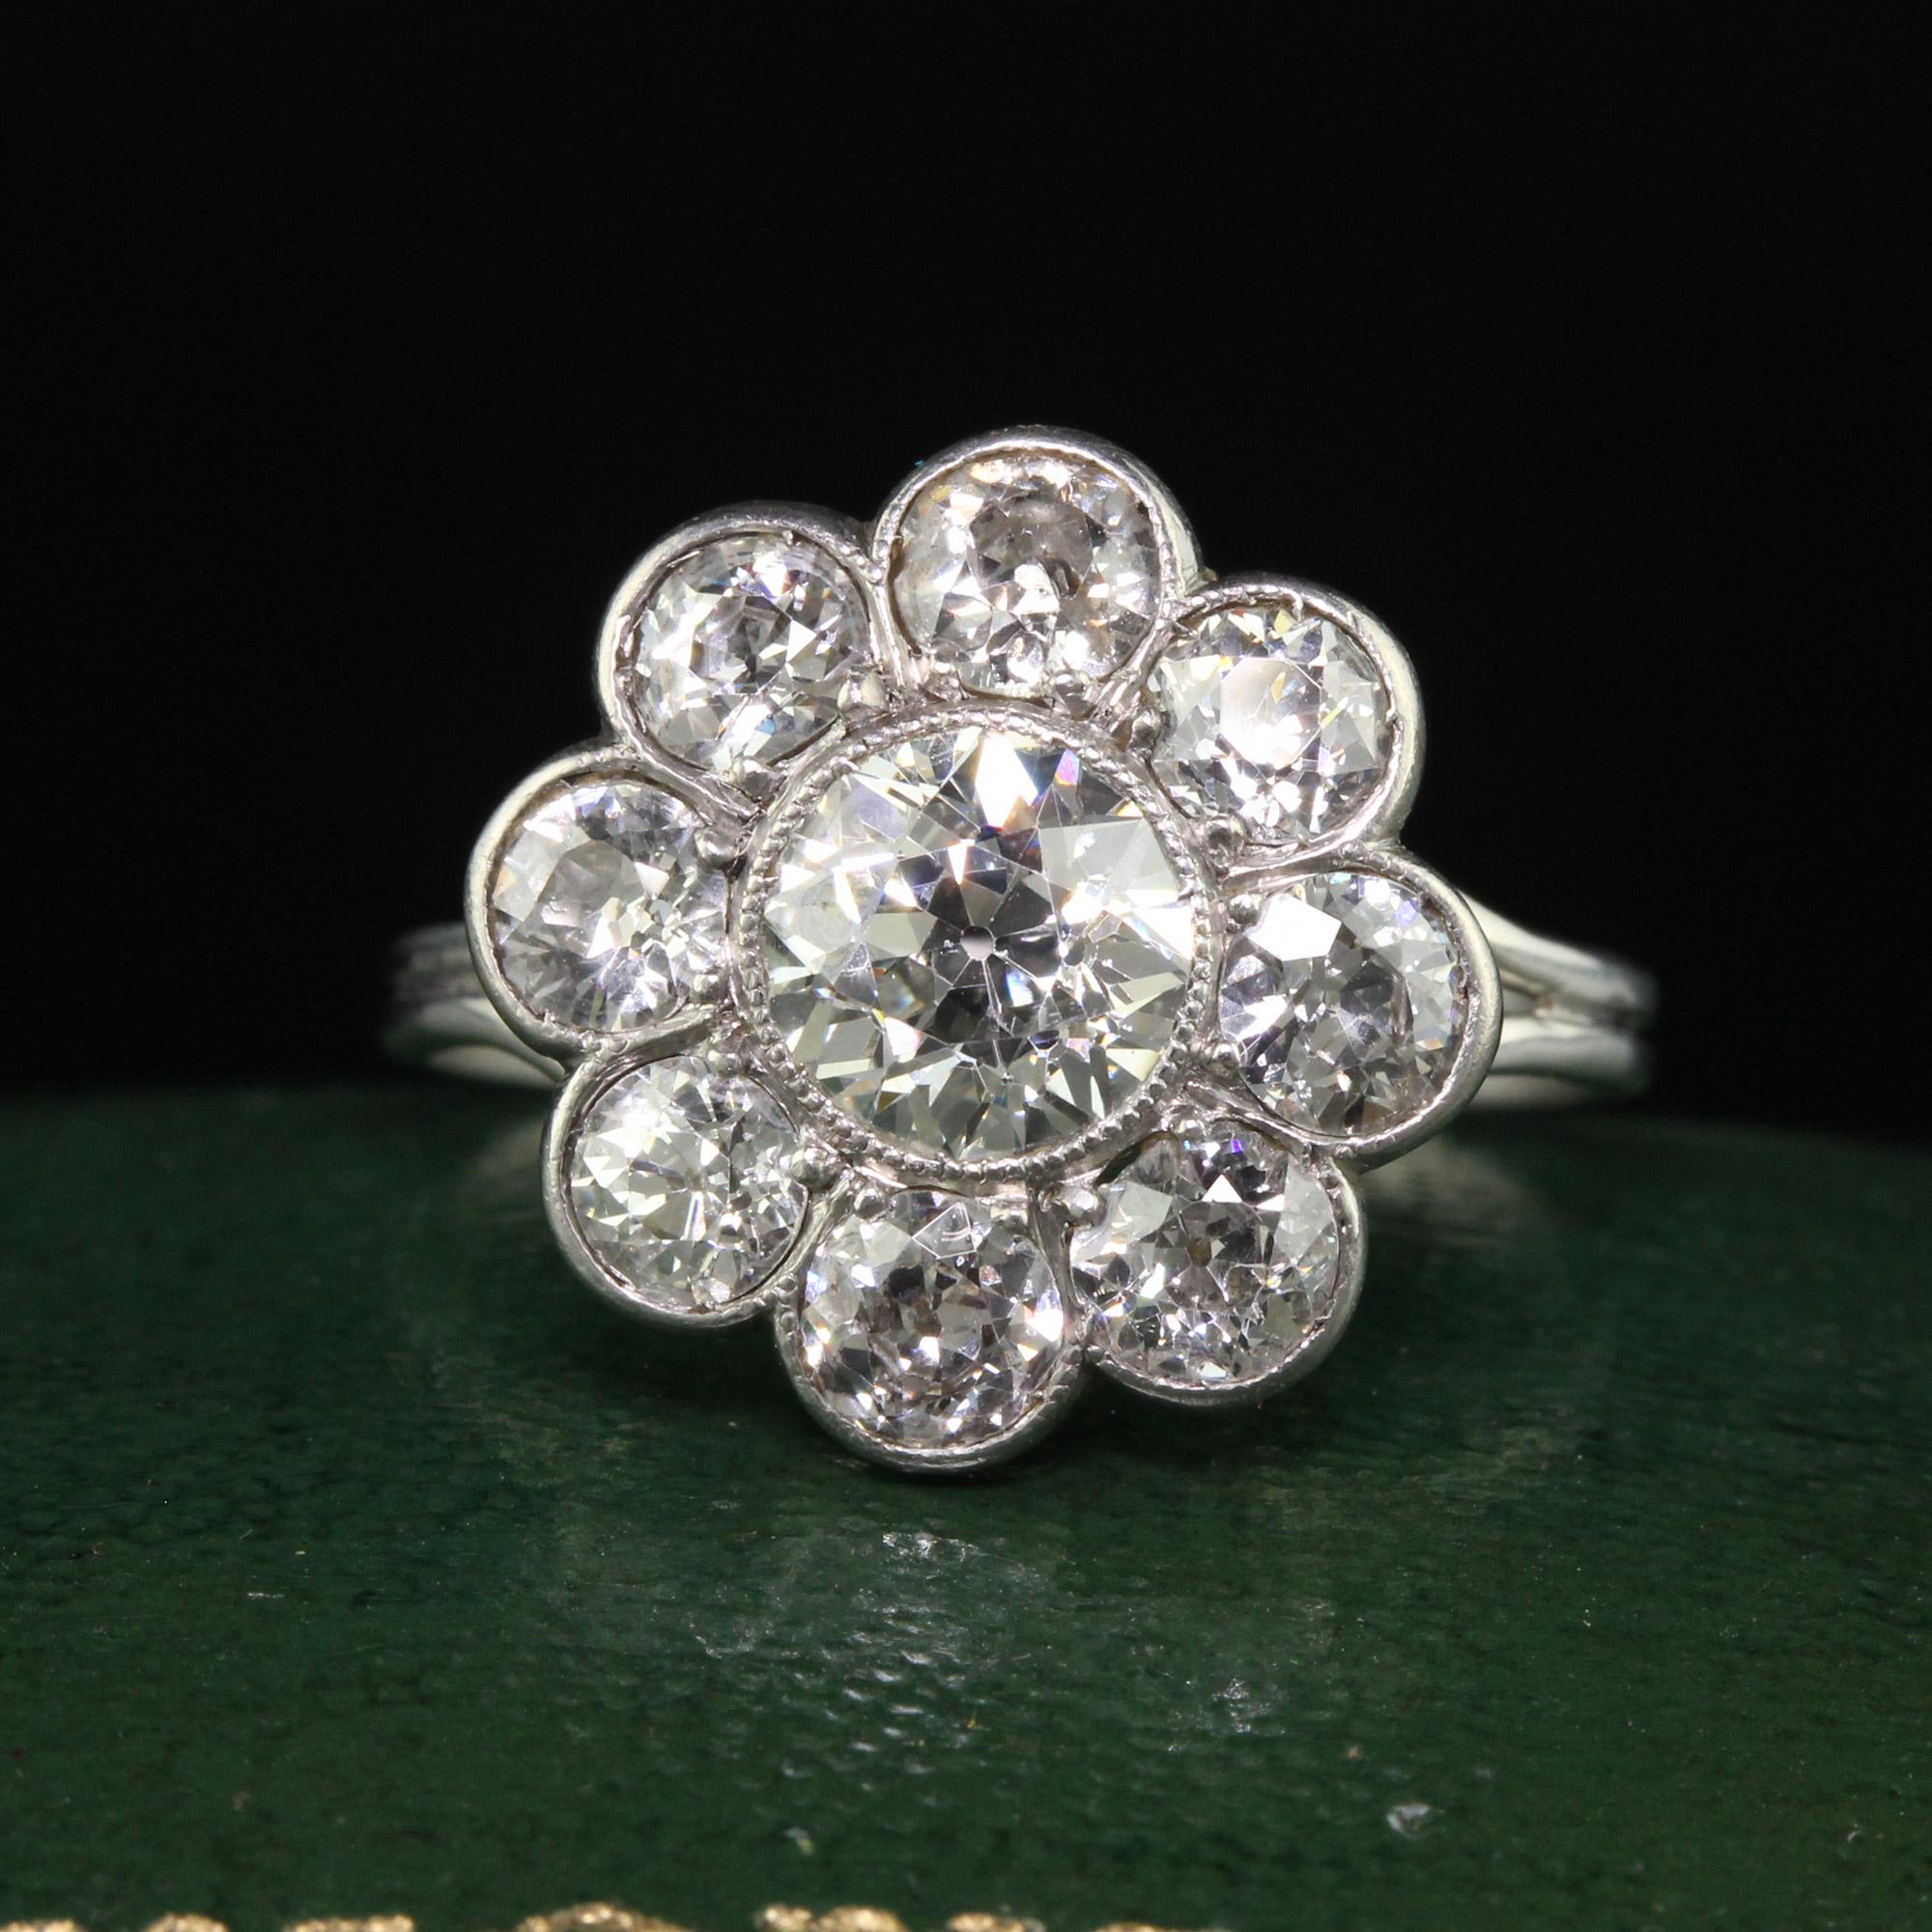 Beautiful Antique Art Deco Platinum Old European Cut Diamond Cluster Engagement Ring. This incredible engagement ring is crafted in platinum. The center is an old European cut diamond that is set in a gorgeous Art Deco mounting that has large old